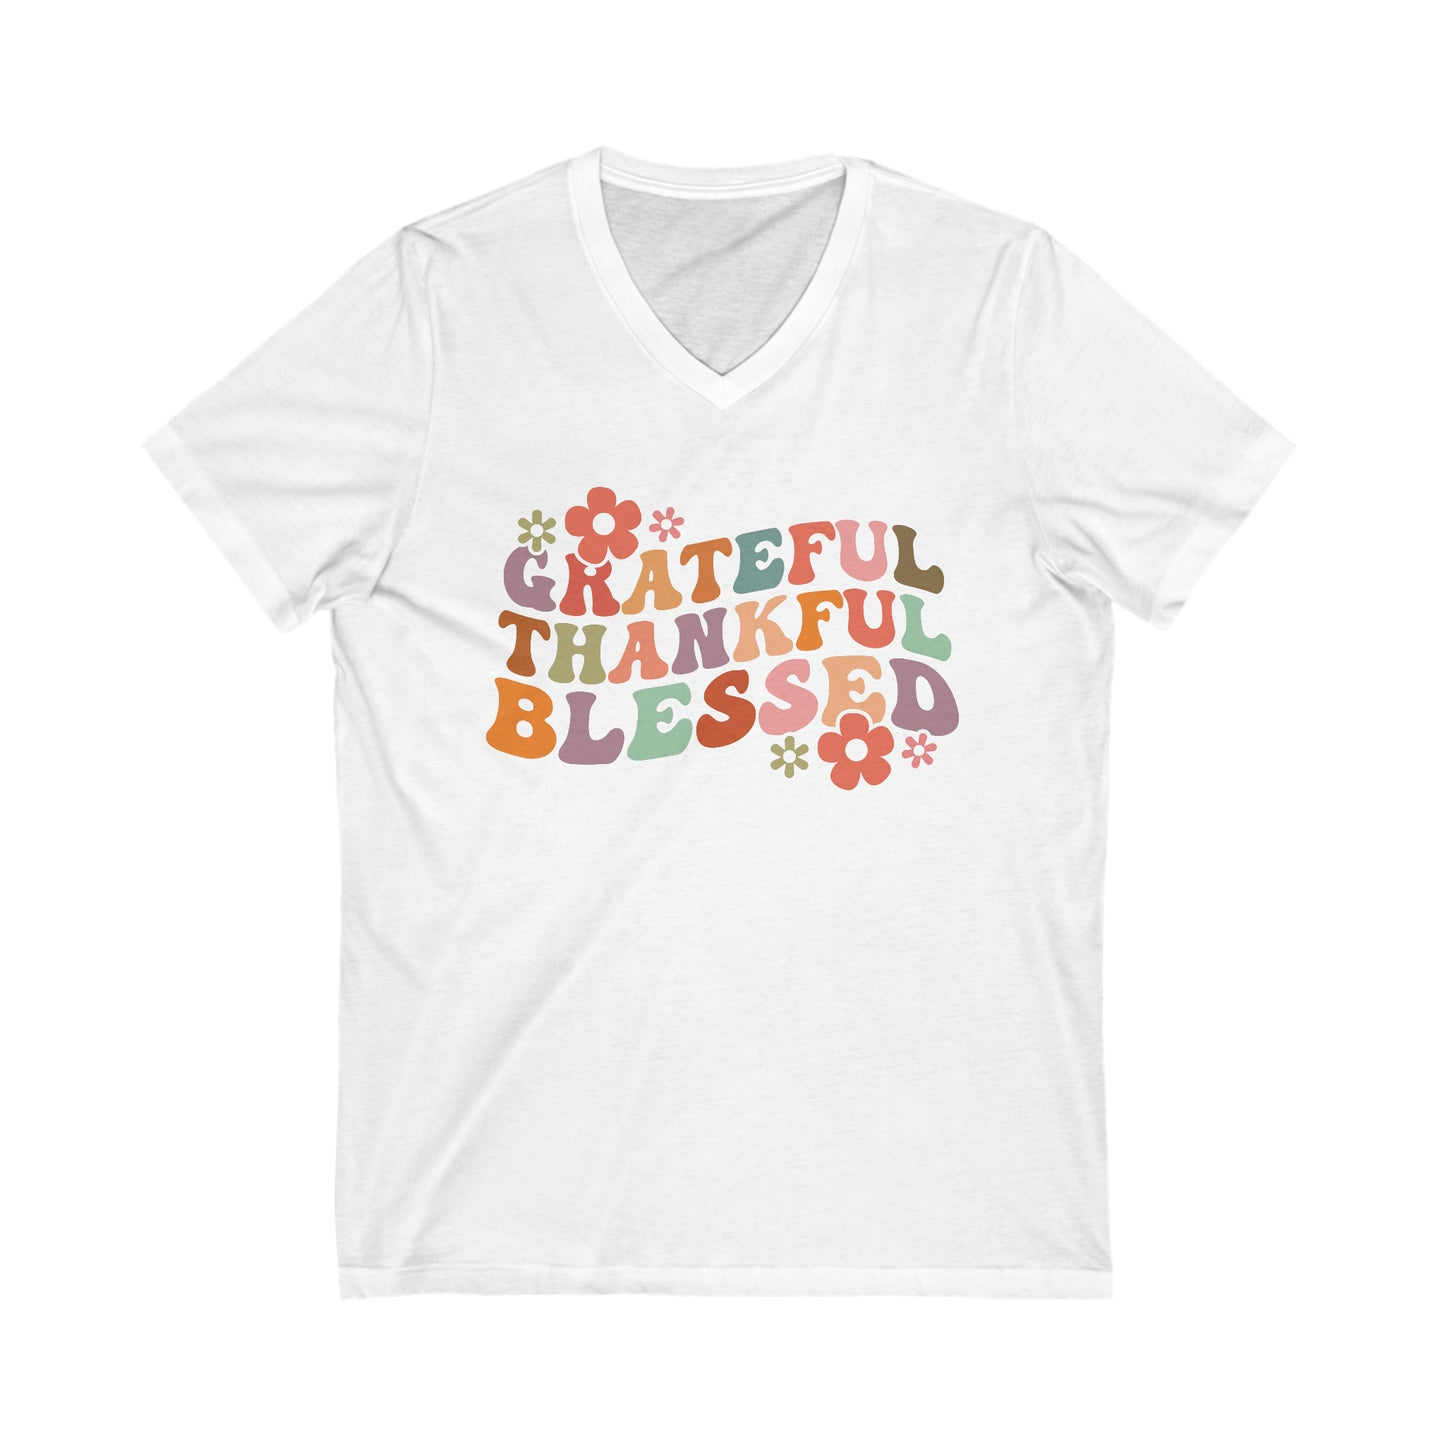 Retro Thanksgiving T-Shirt For Blessed T Shirt For Thankful TShirt For Grateful Tee For Turkey Day